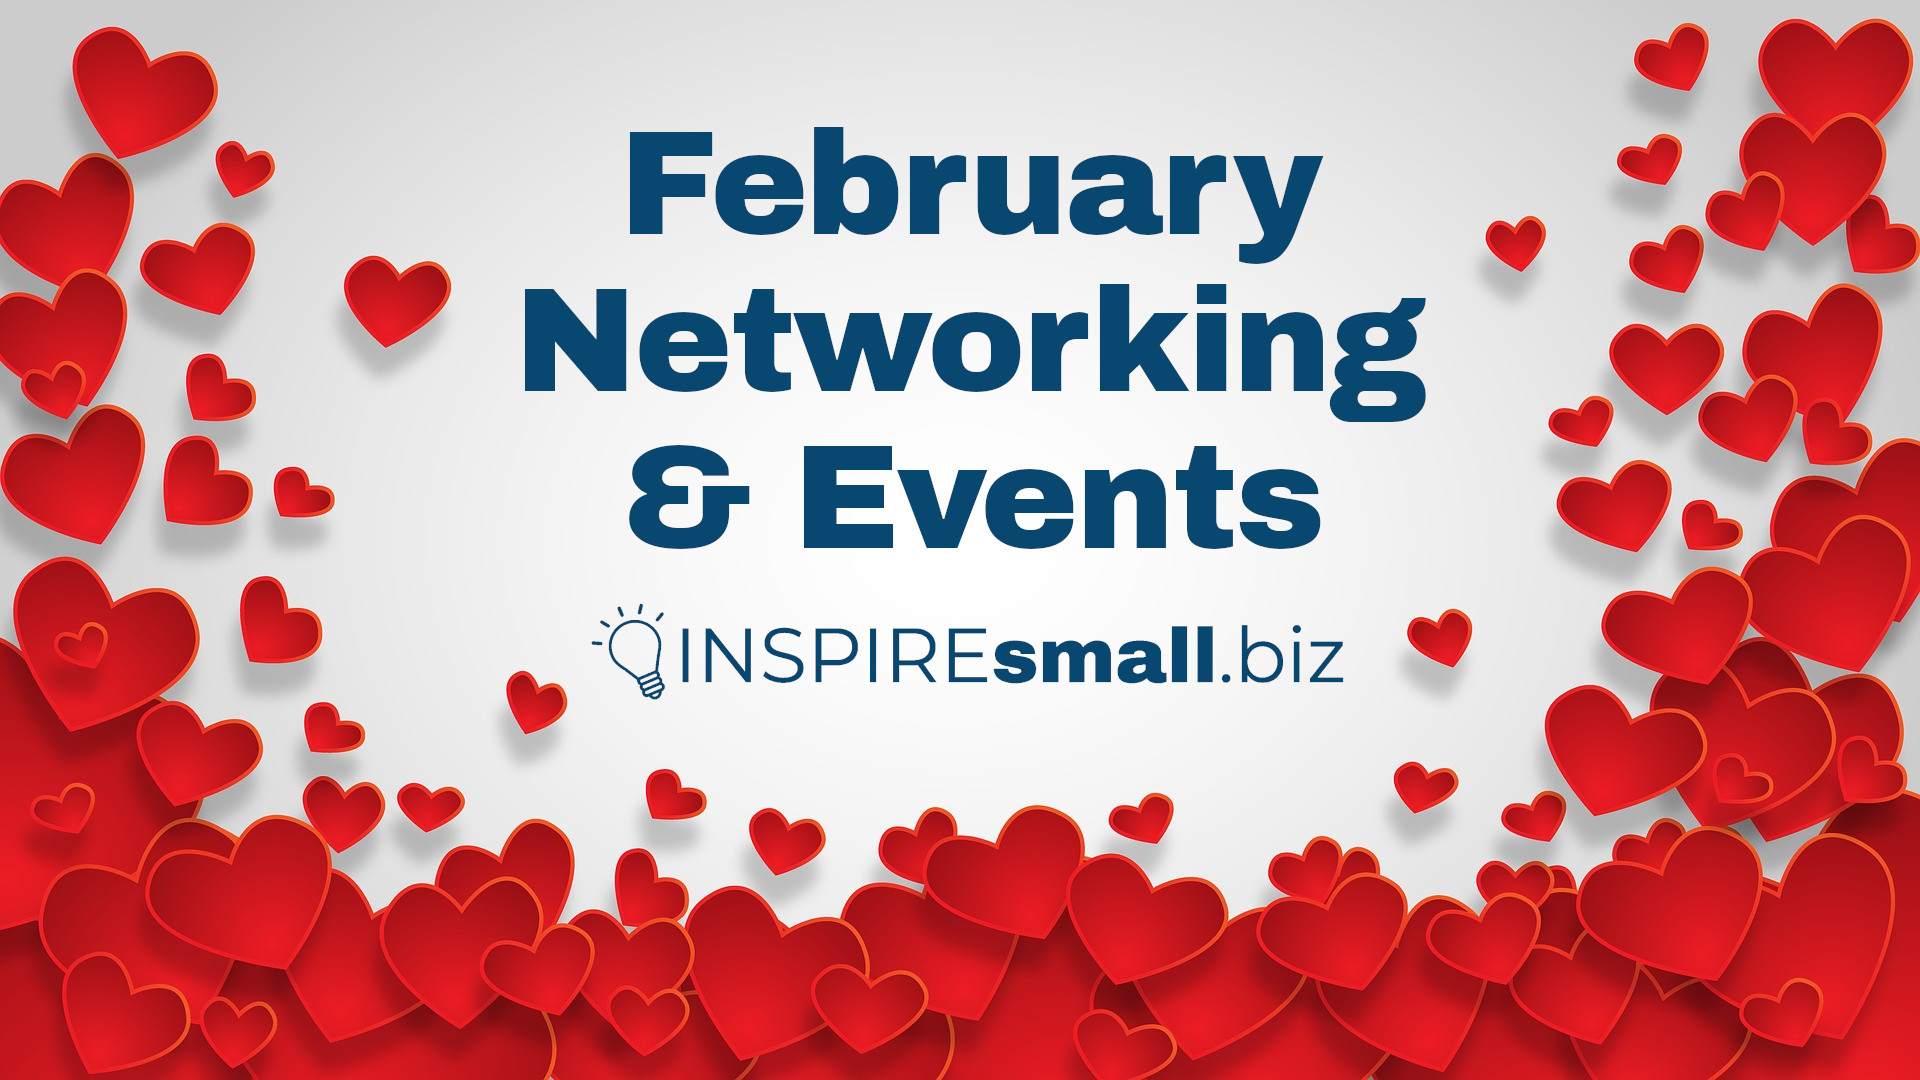 February Networking and Events on INSPIREsmall.biz